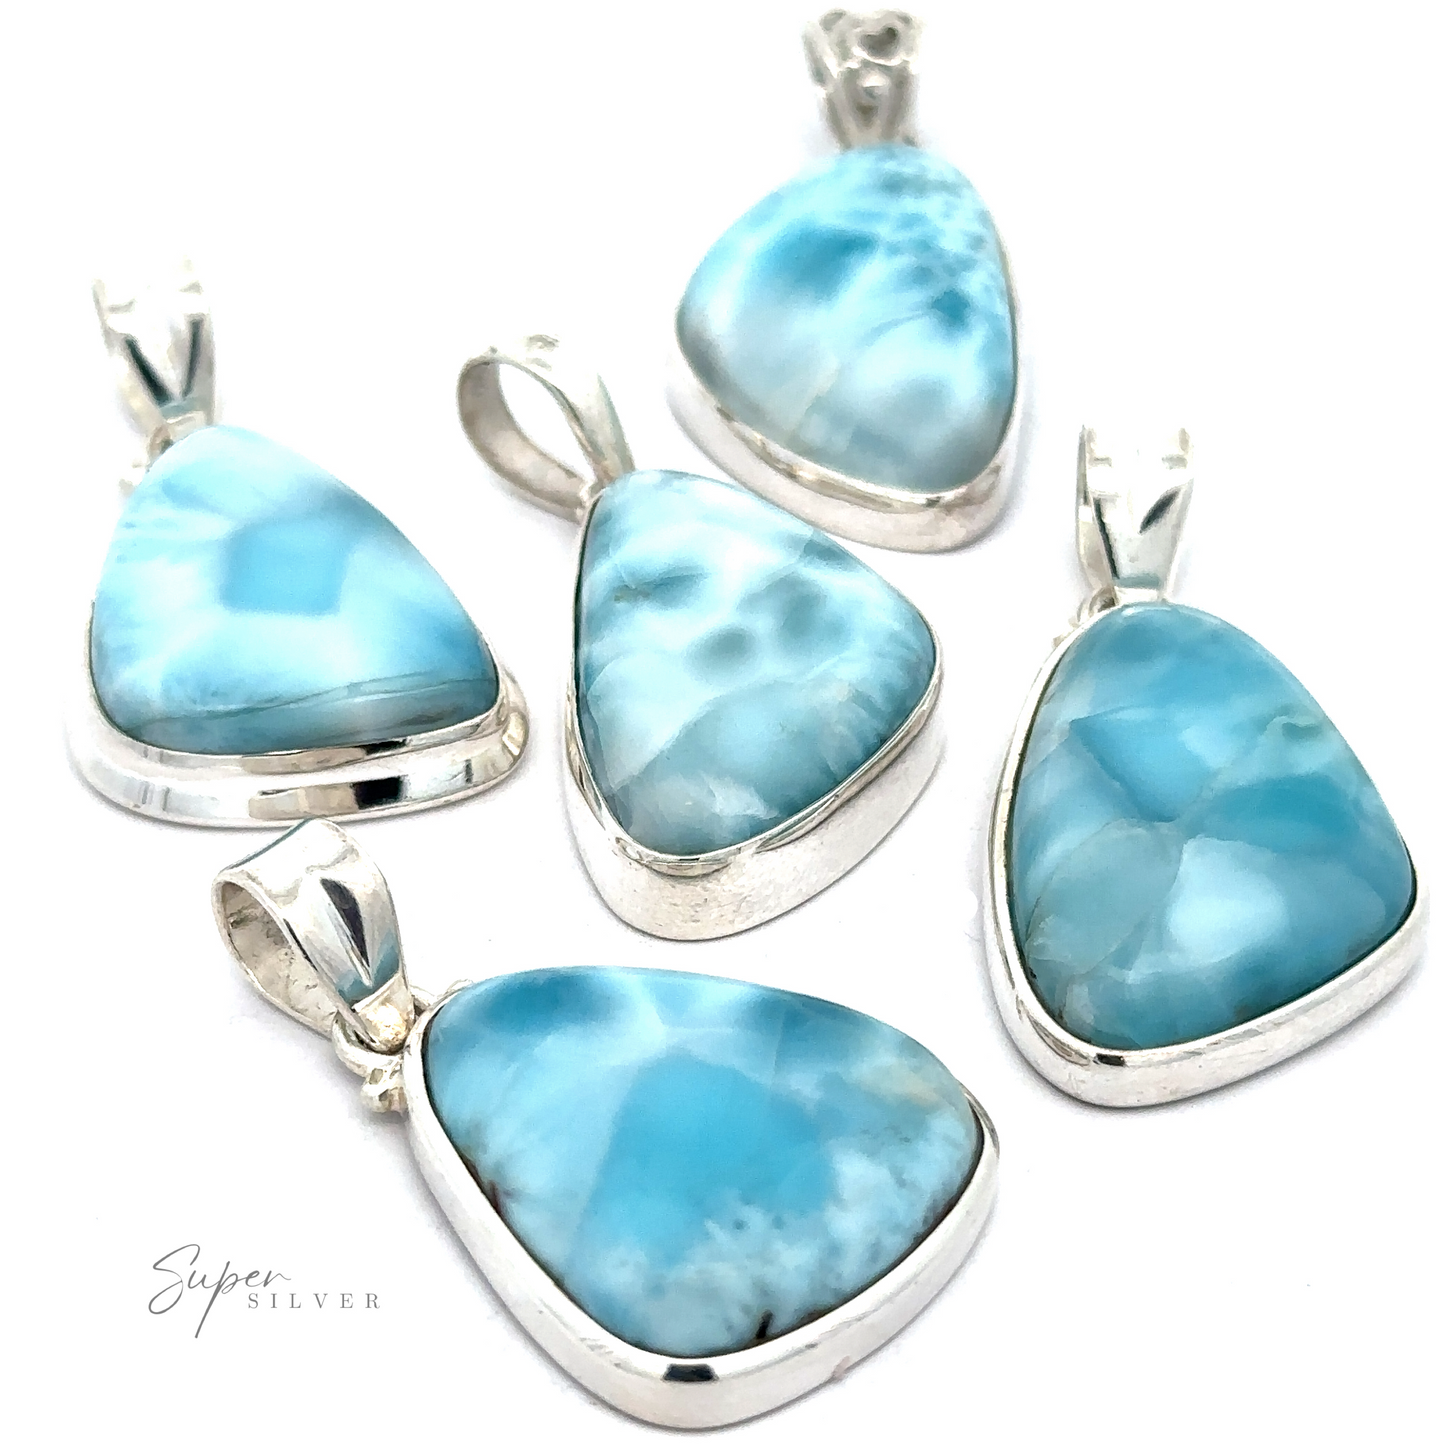 Five Freeform Shape Larimar Pendants featuring blue and white marbled Larimar stones arranged on a white background. "Super Silver" is written in cursive at the bottom left. Chain not included.